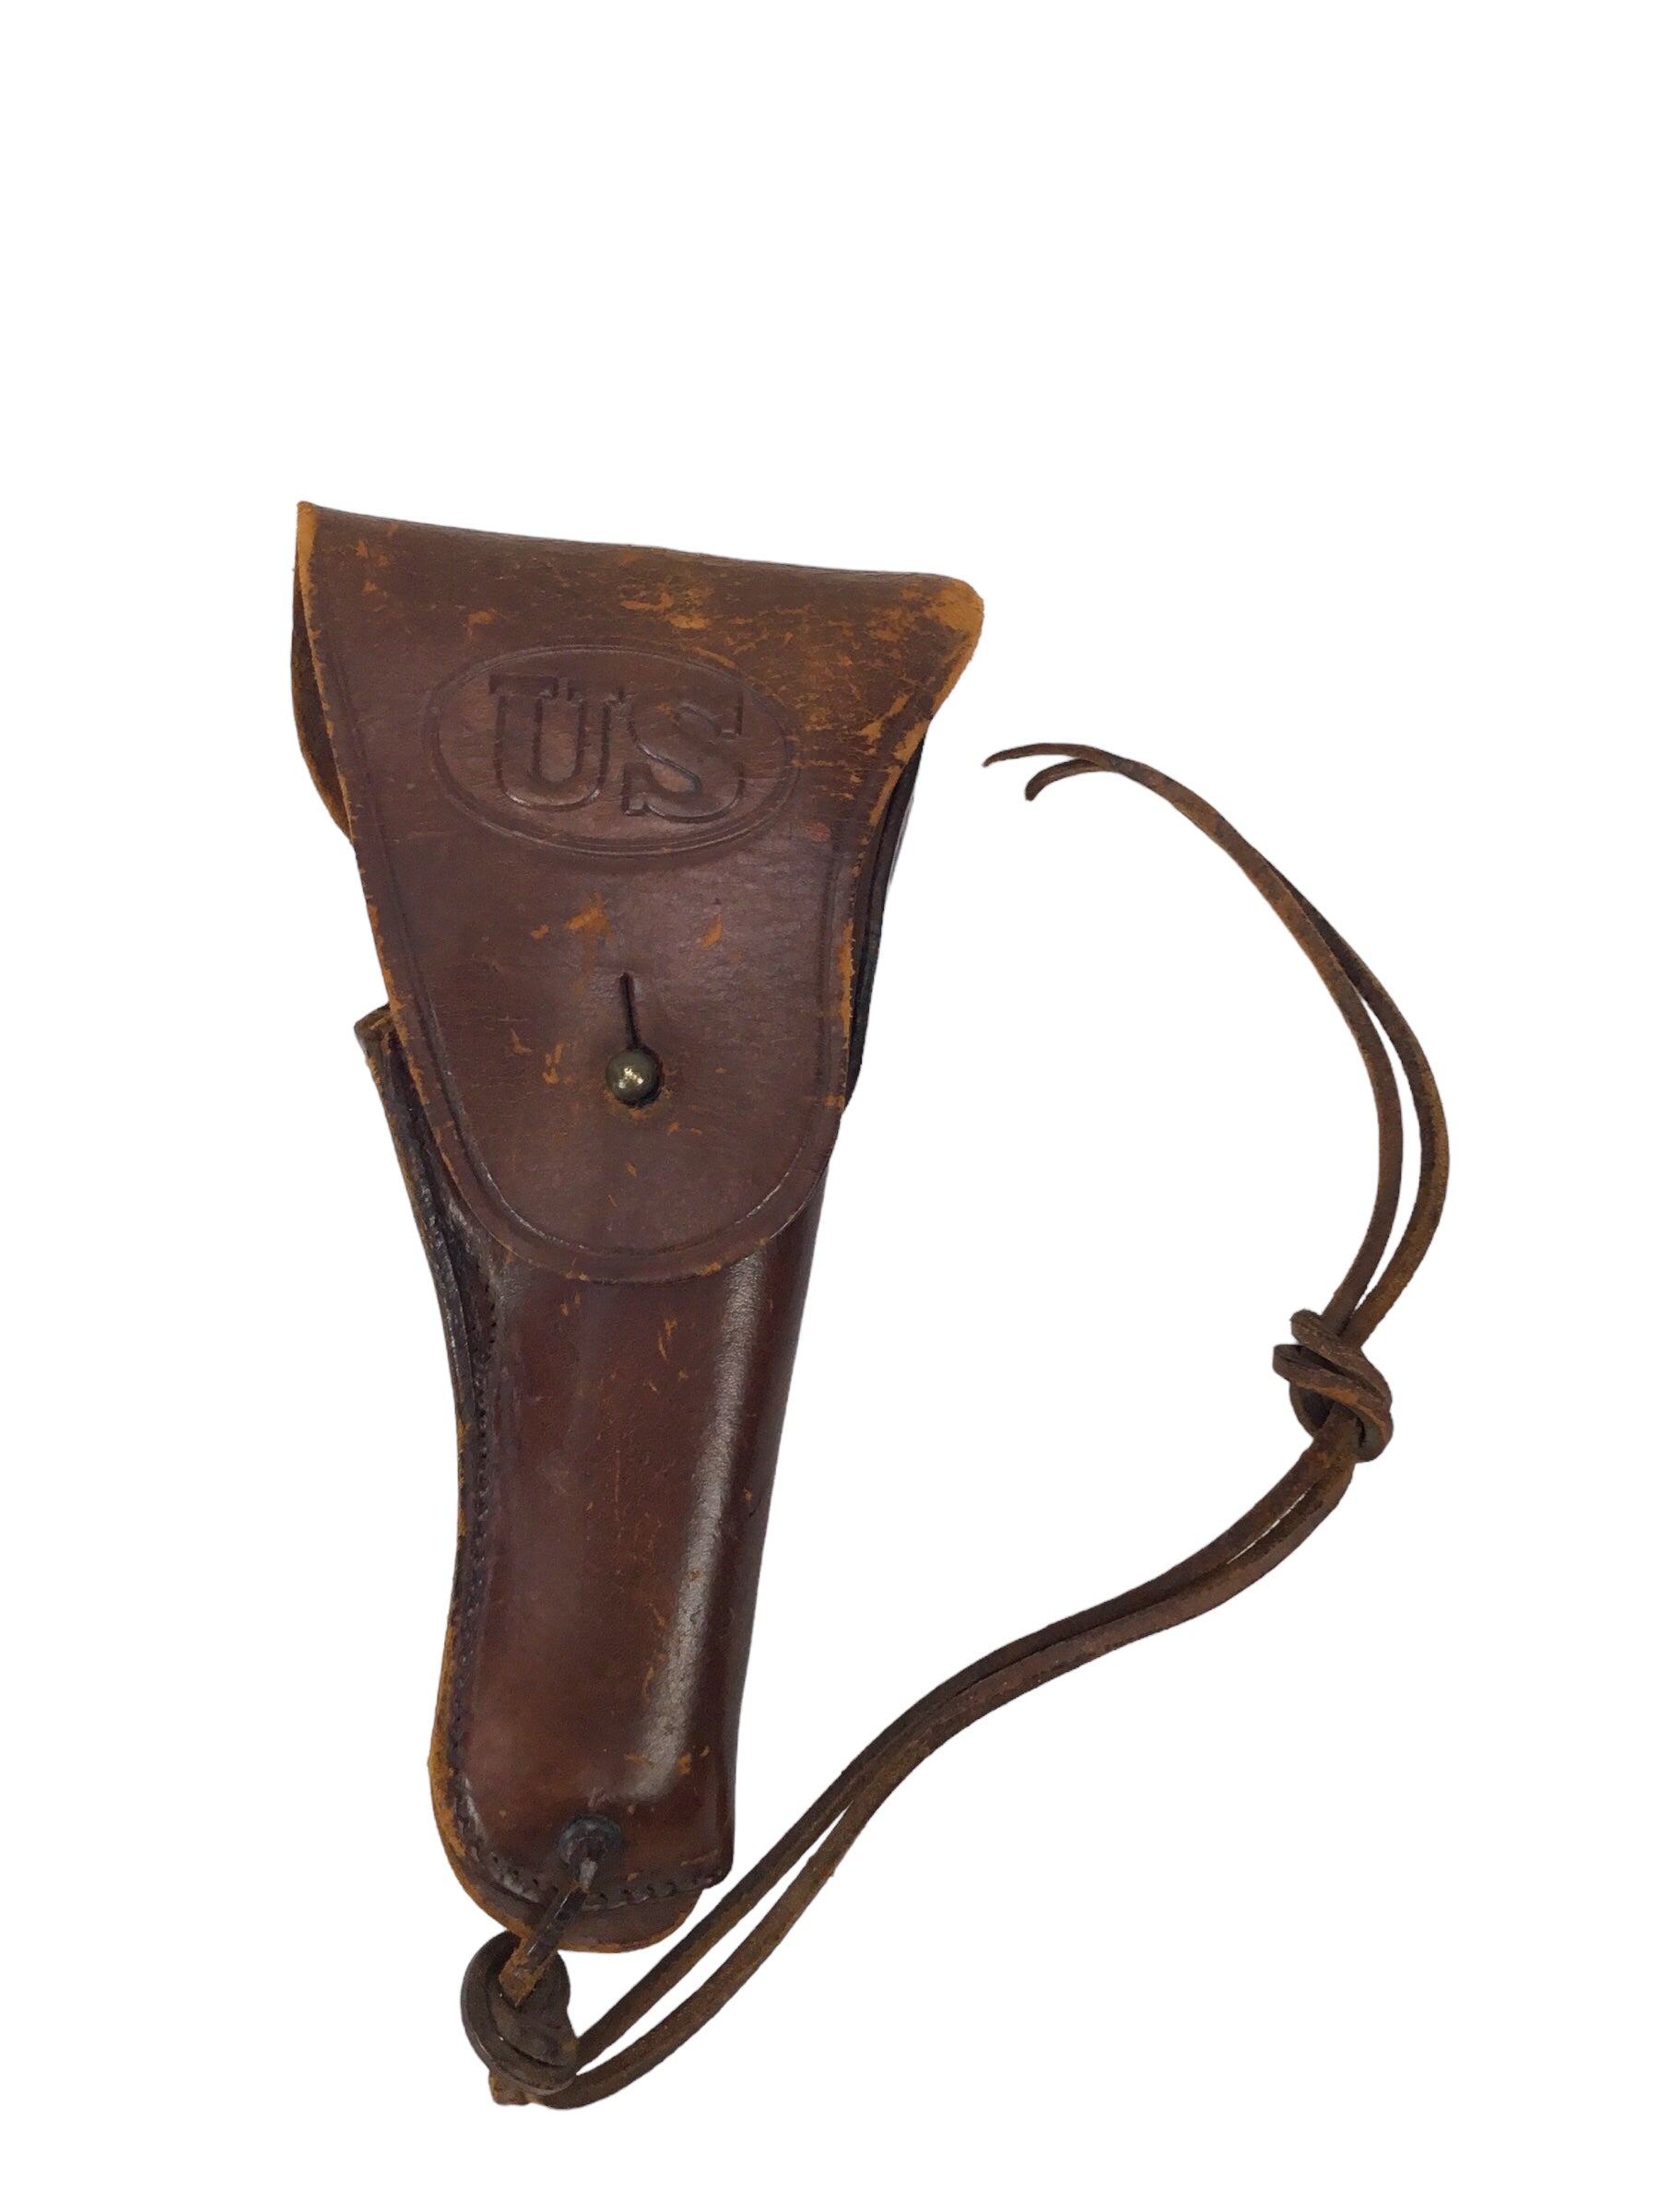 U.S. WWII leather pistol holster marked "U.S." on flap, further marked "Sears, 1942"